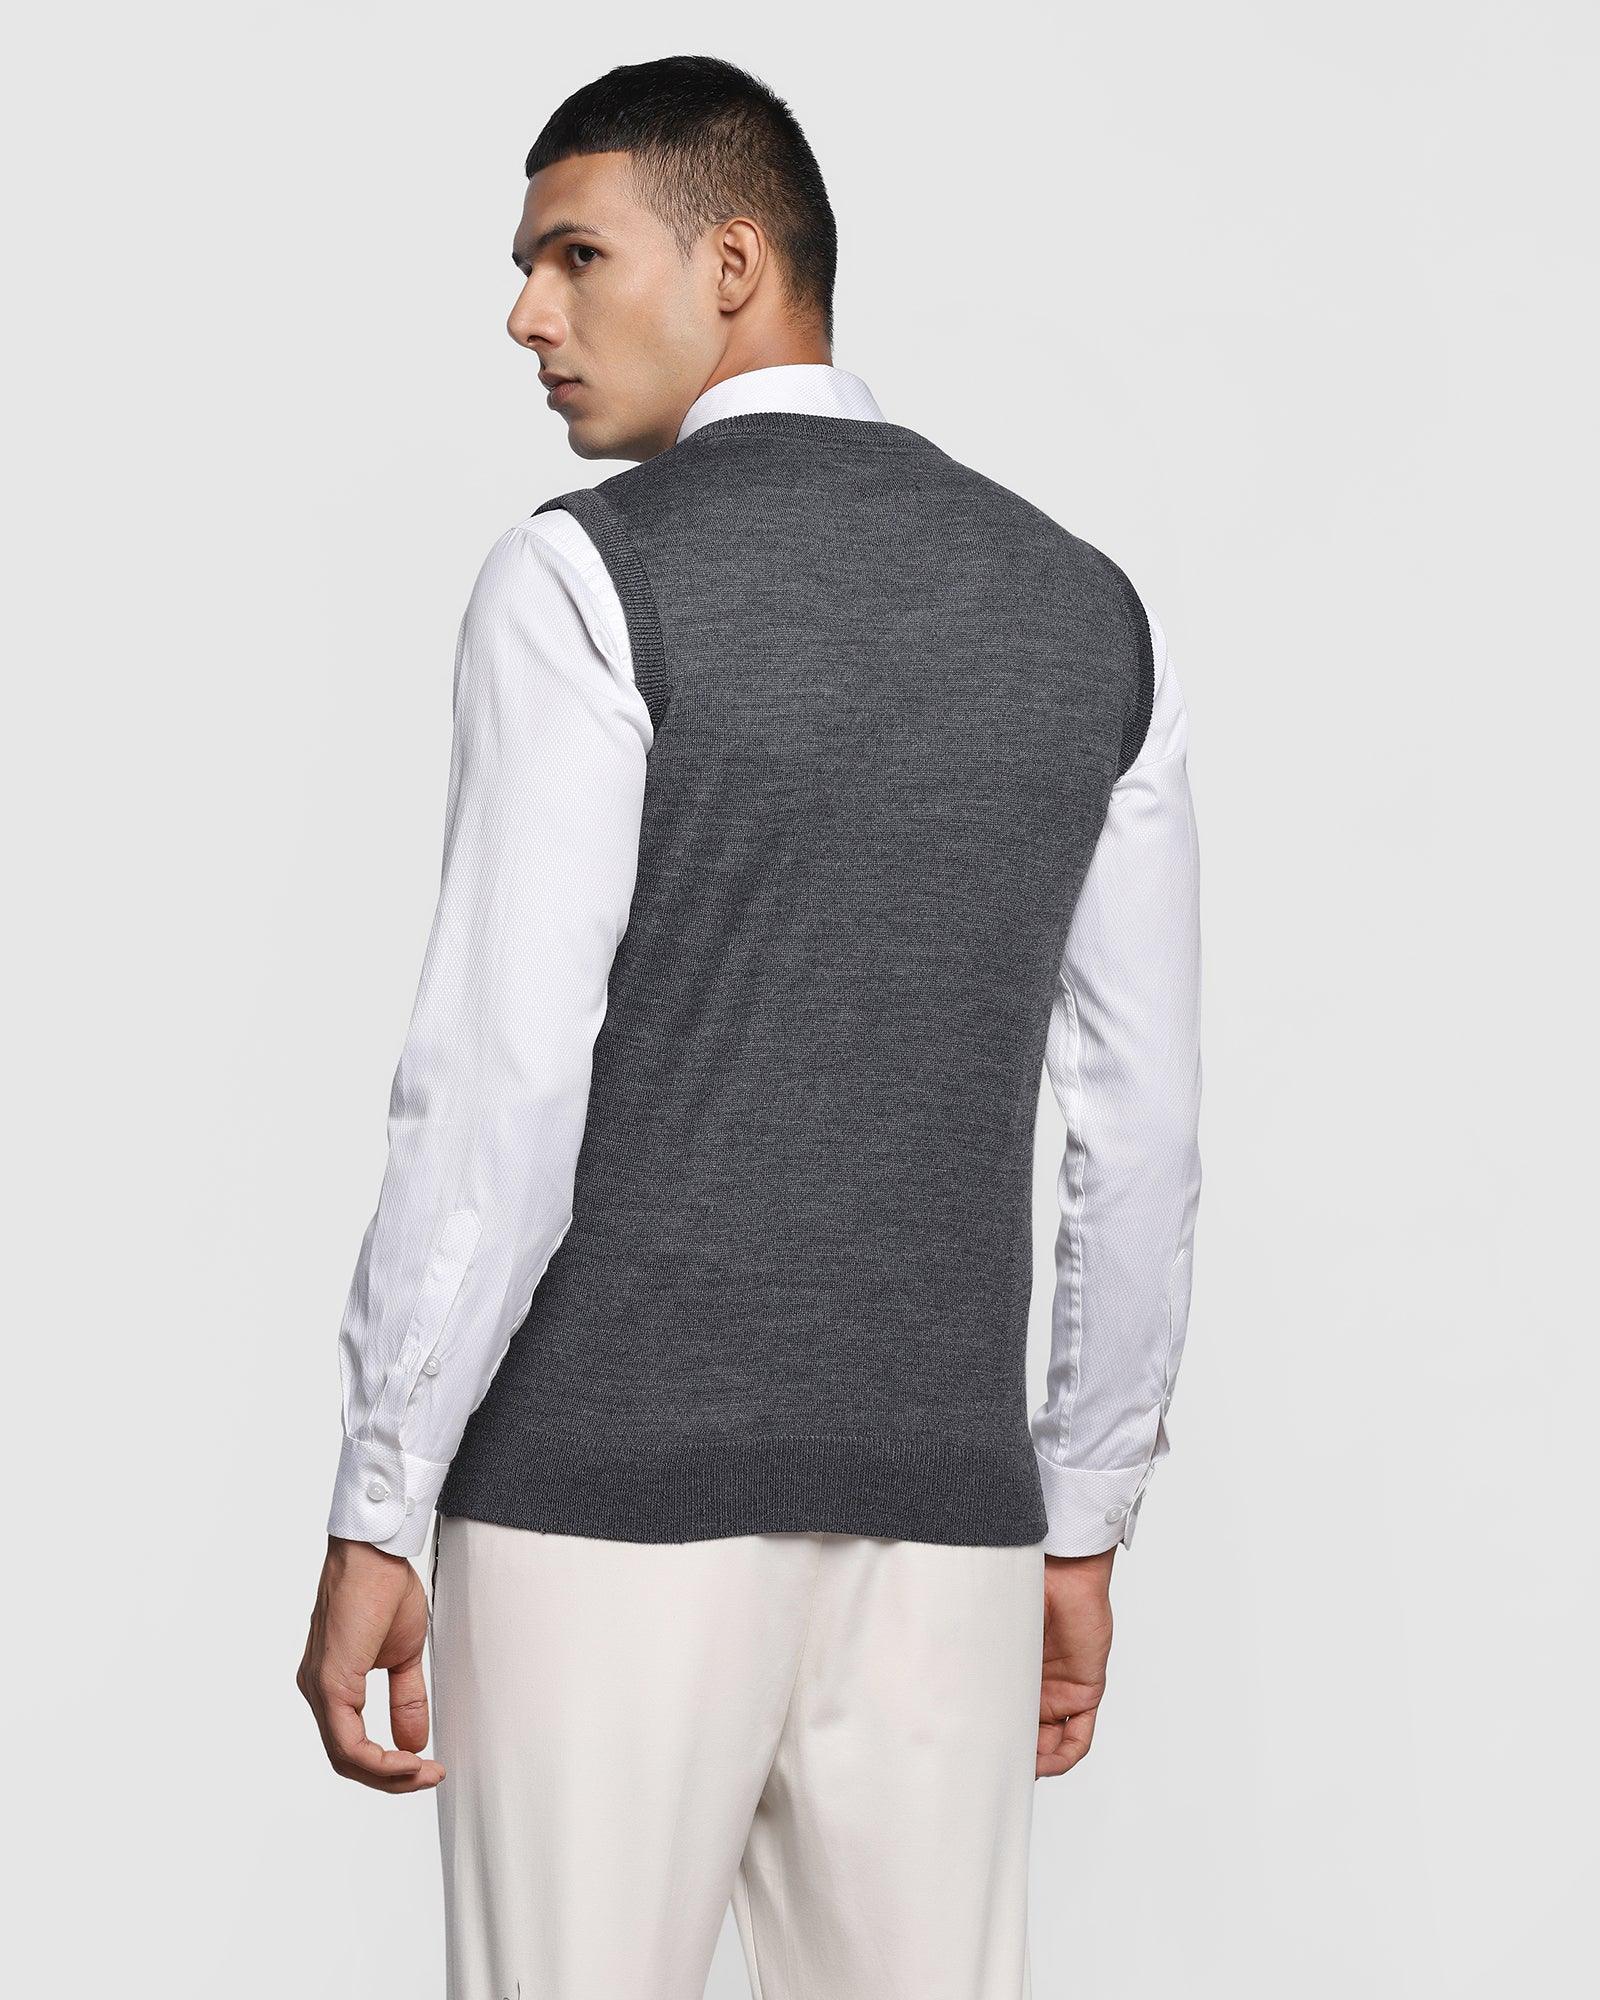 V-Neck Charcoal Solid Sweater - Xavior